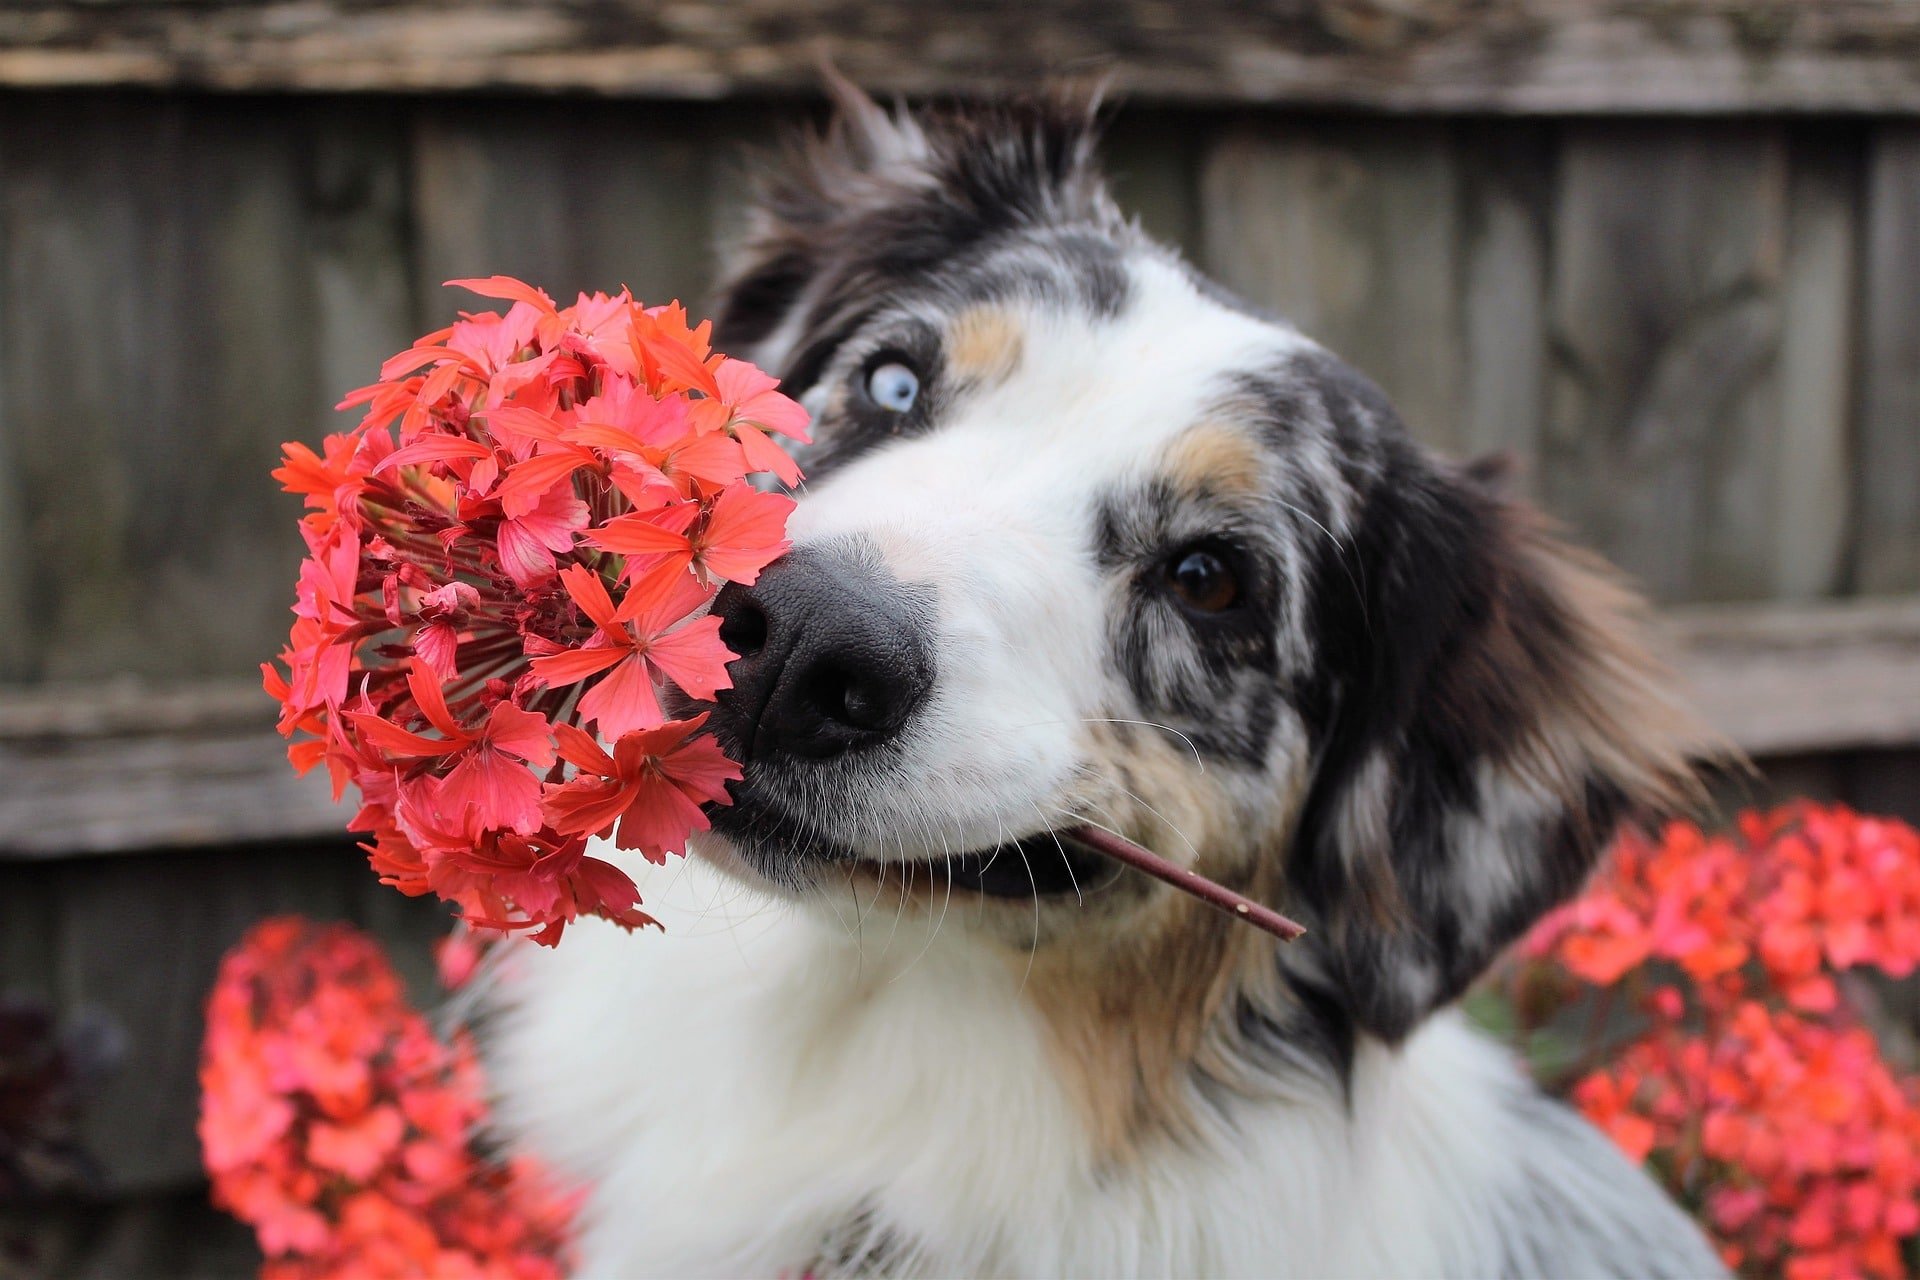 flowers not safe for dogs